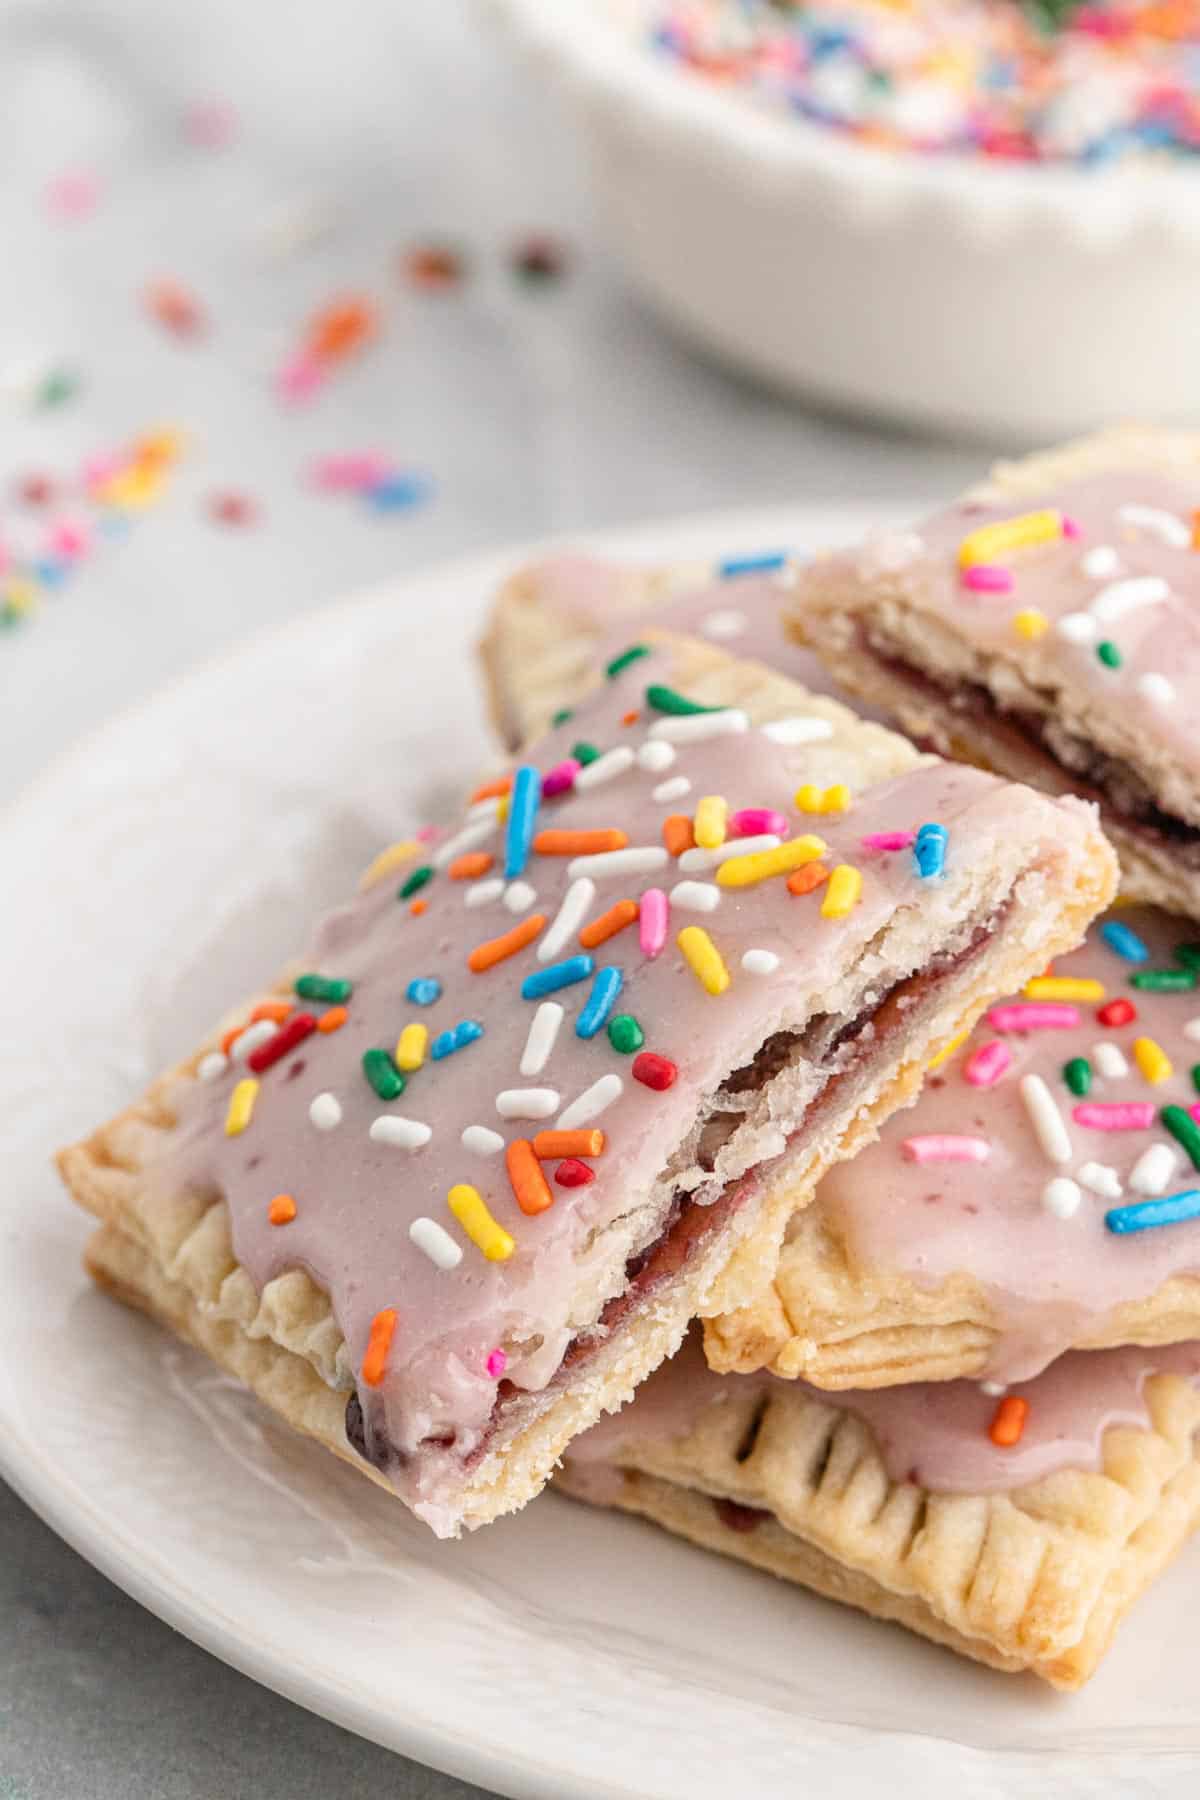 A homemade pop tart on the table cut in half to show the inside and stacked on other poptarts on the plate.